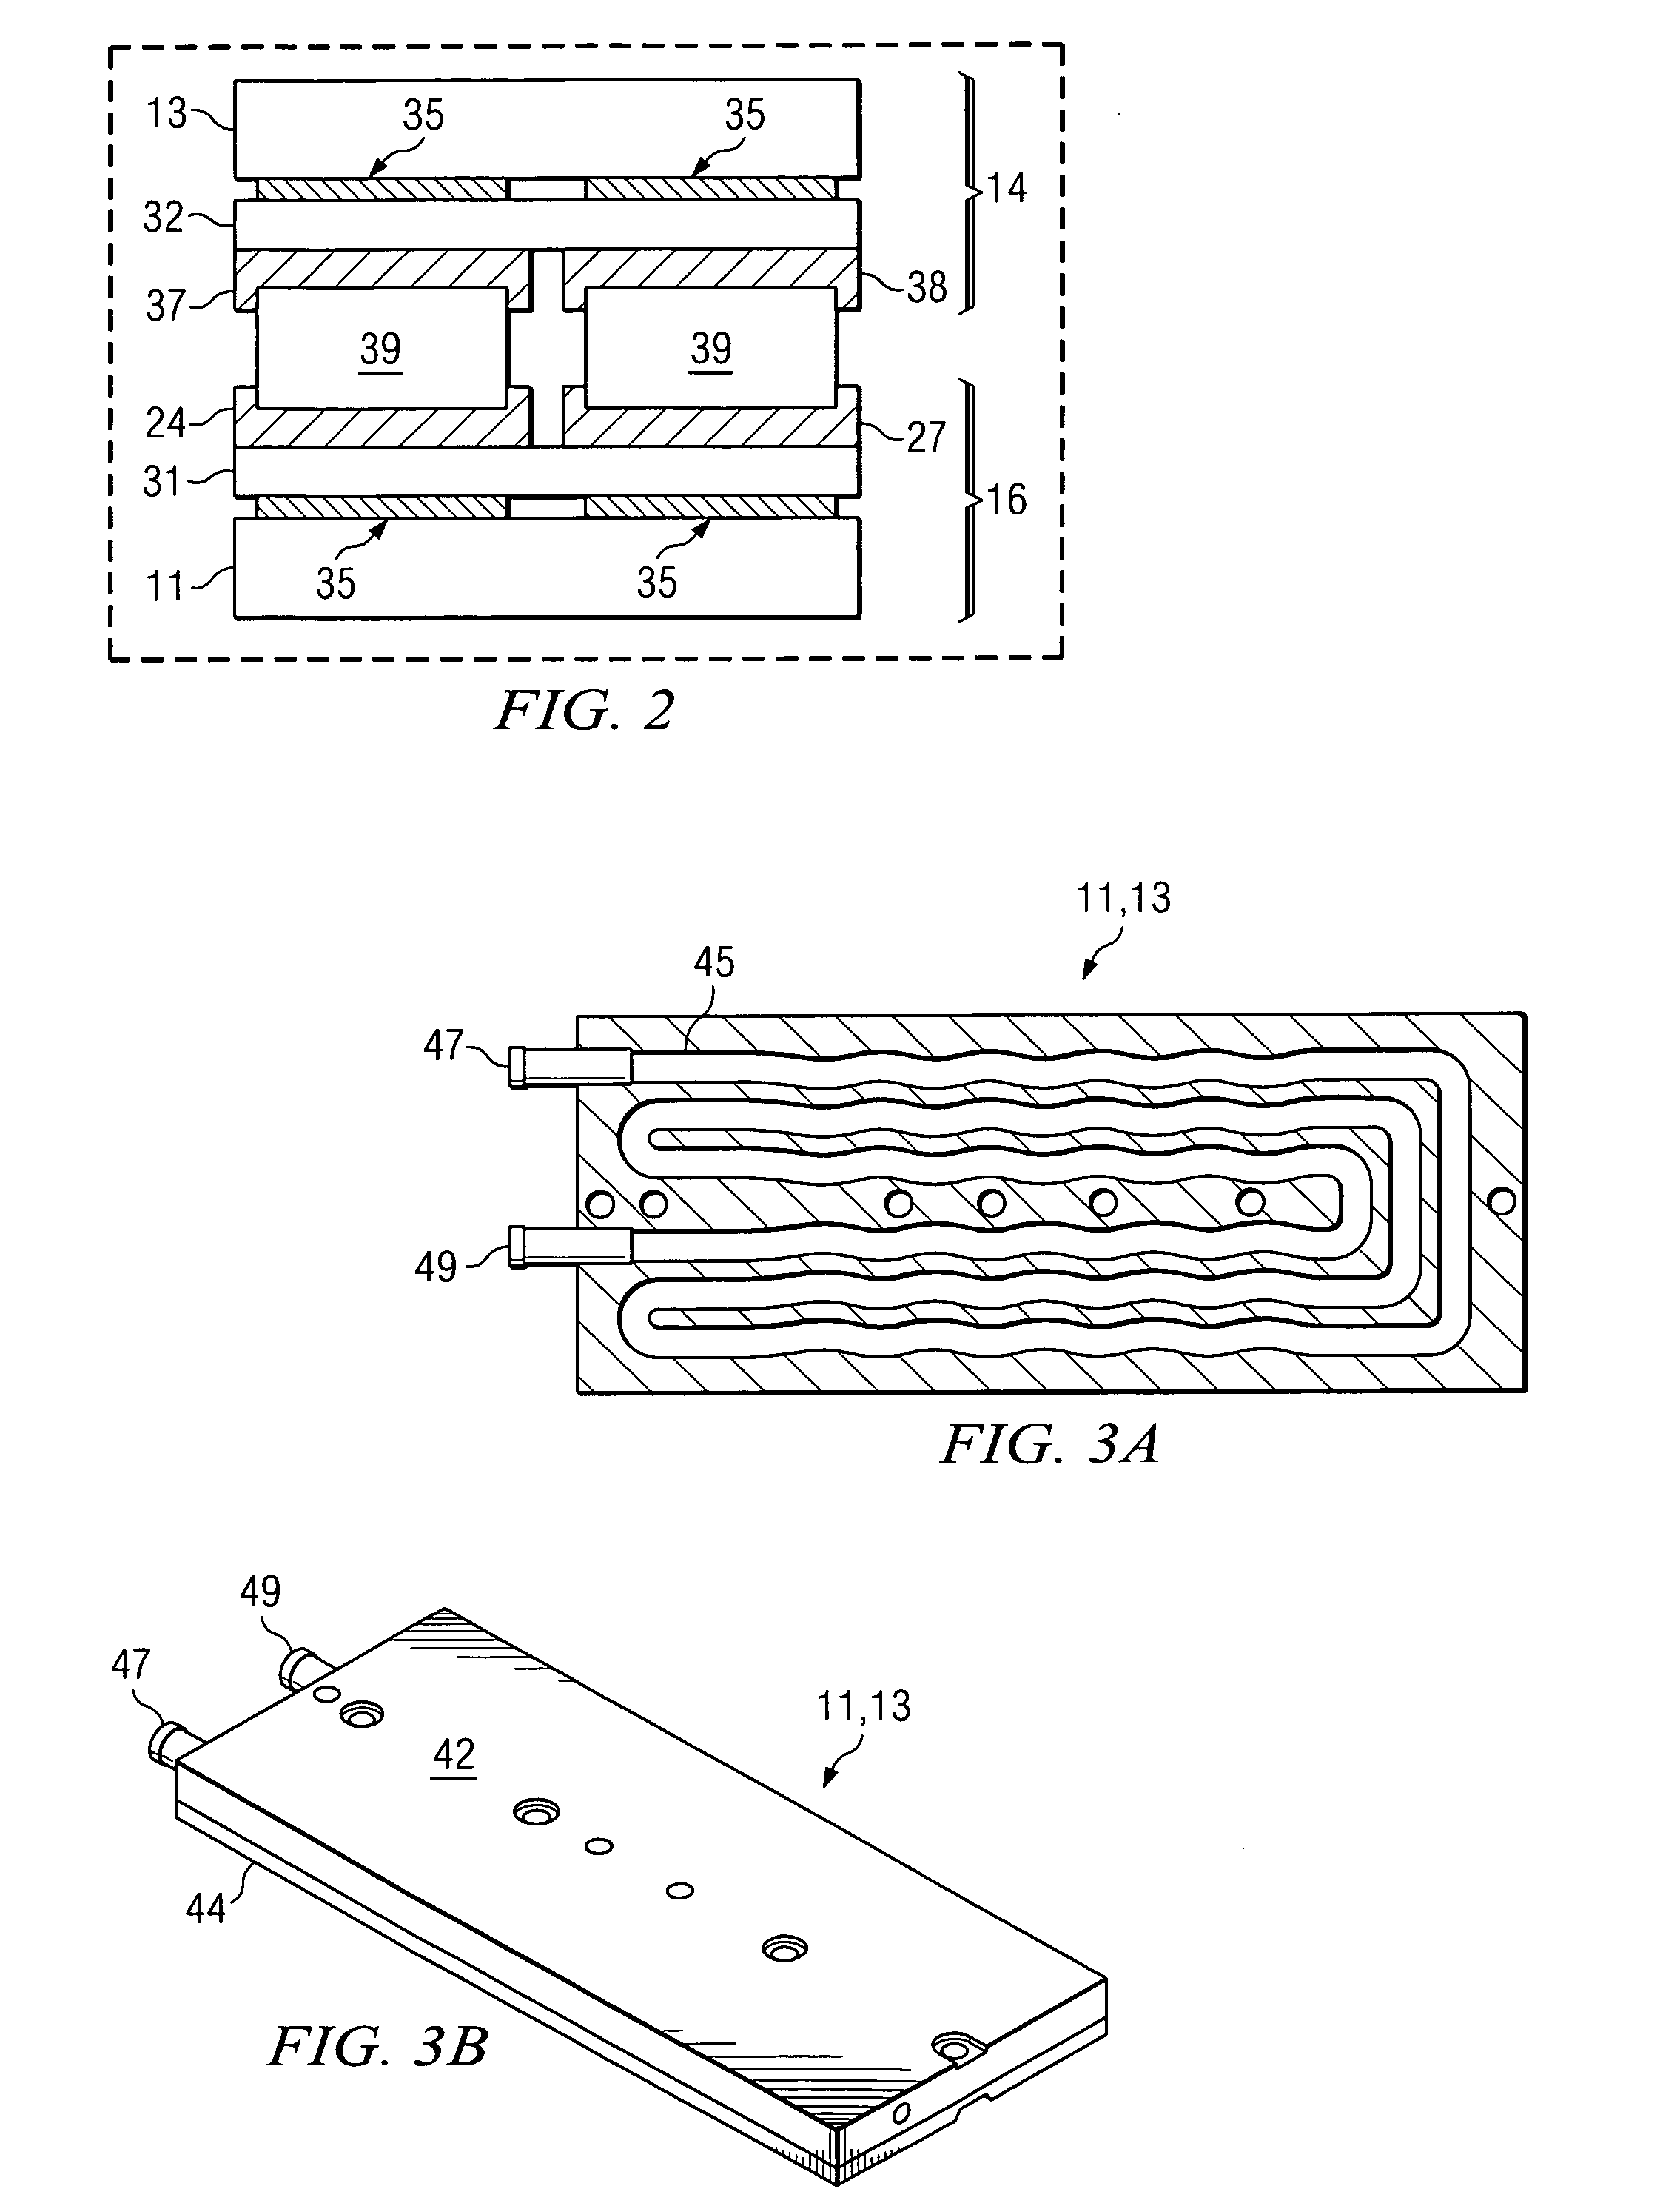 Active, micro-well thermal control subsystem